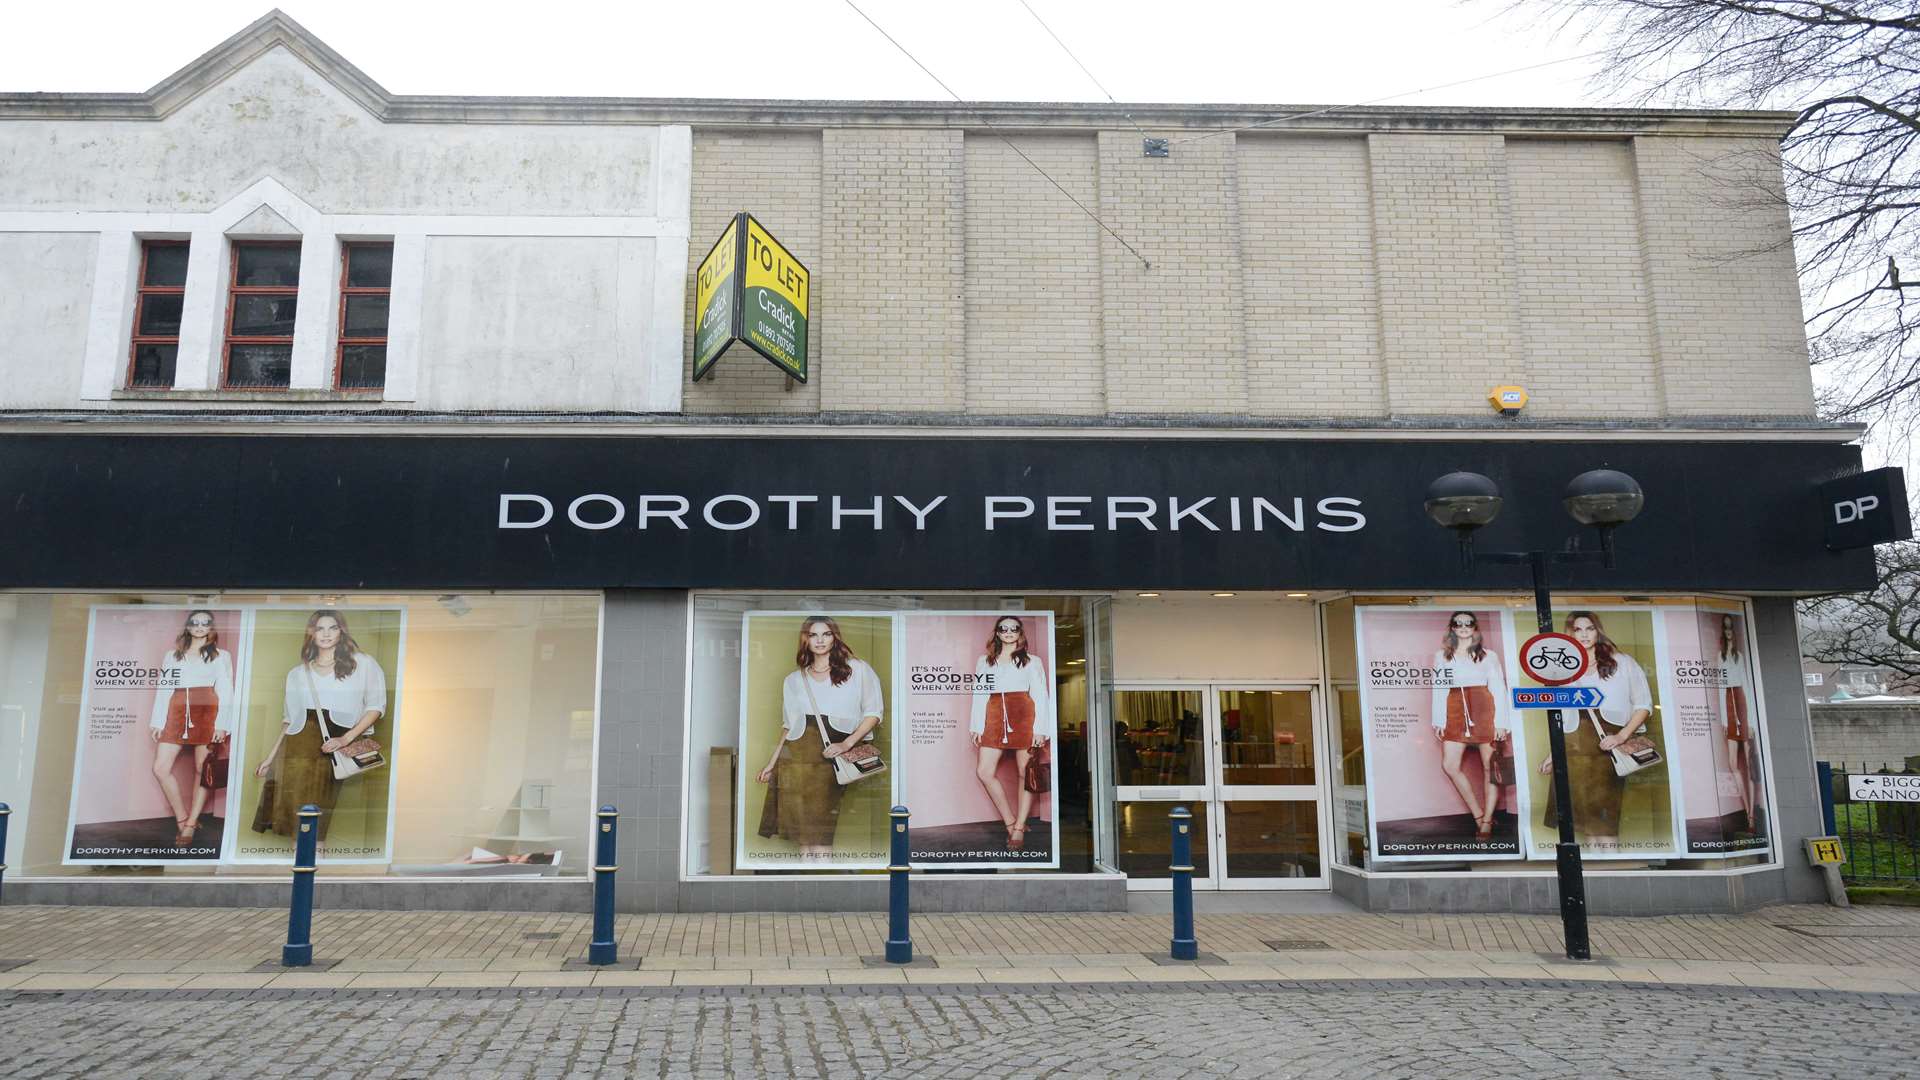 The Dorothy Perkins building is up for rent